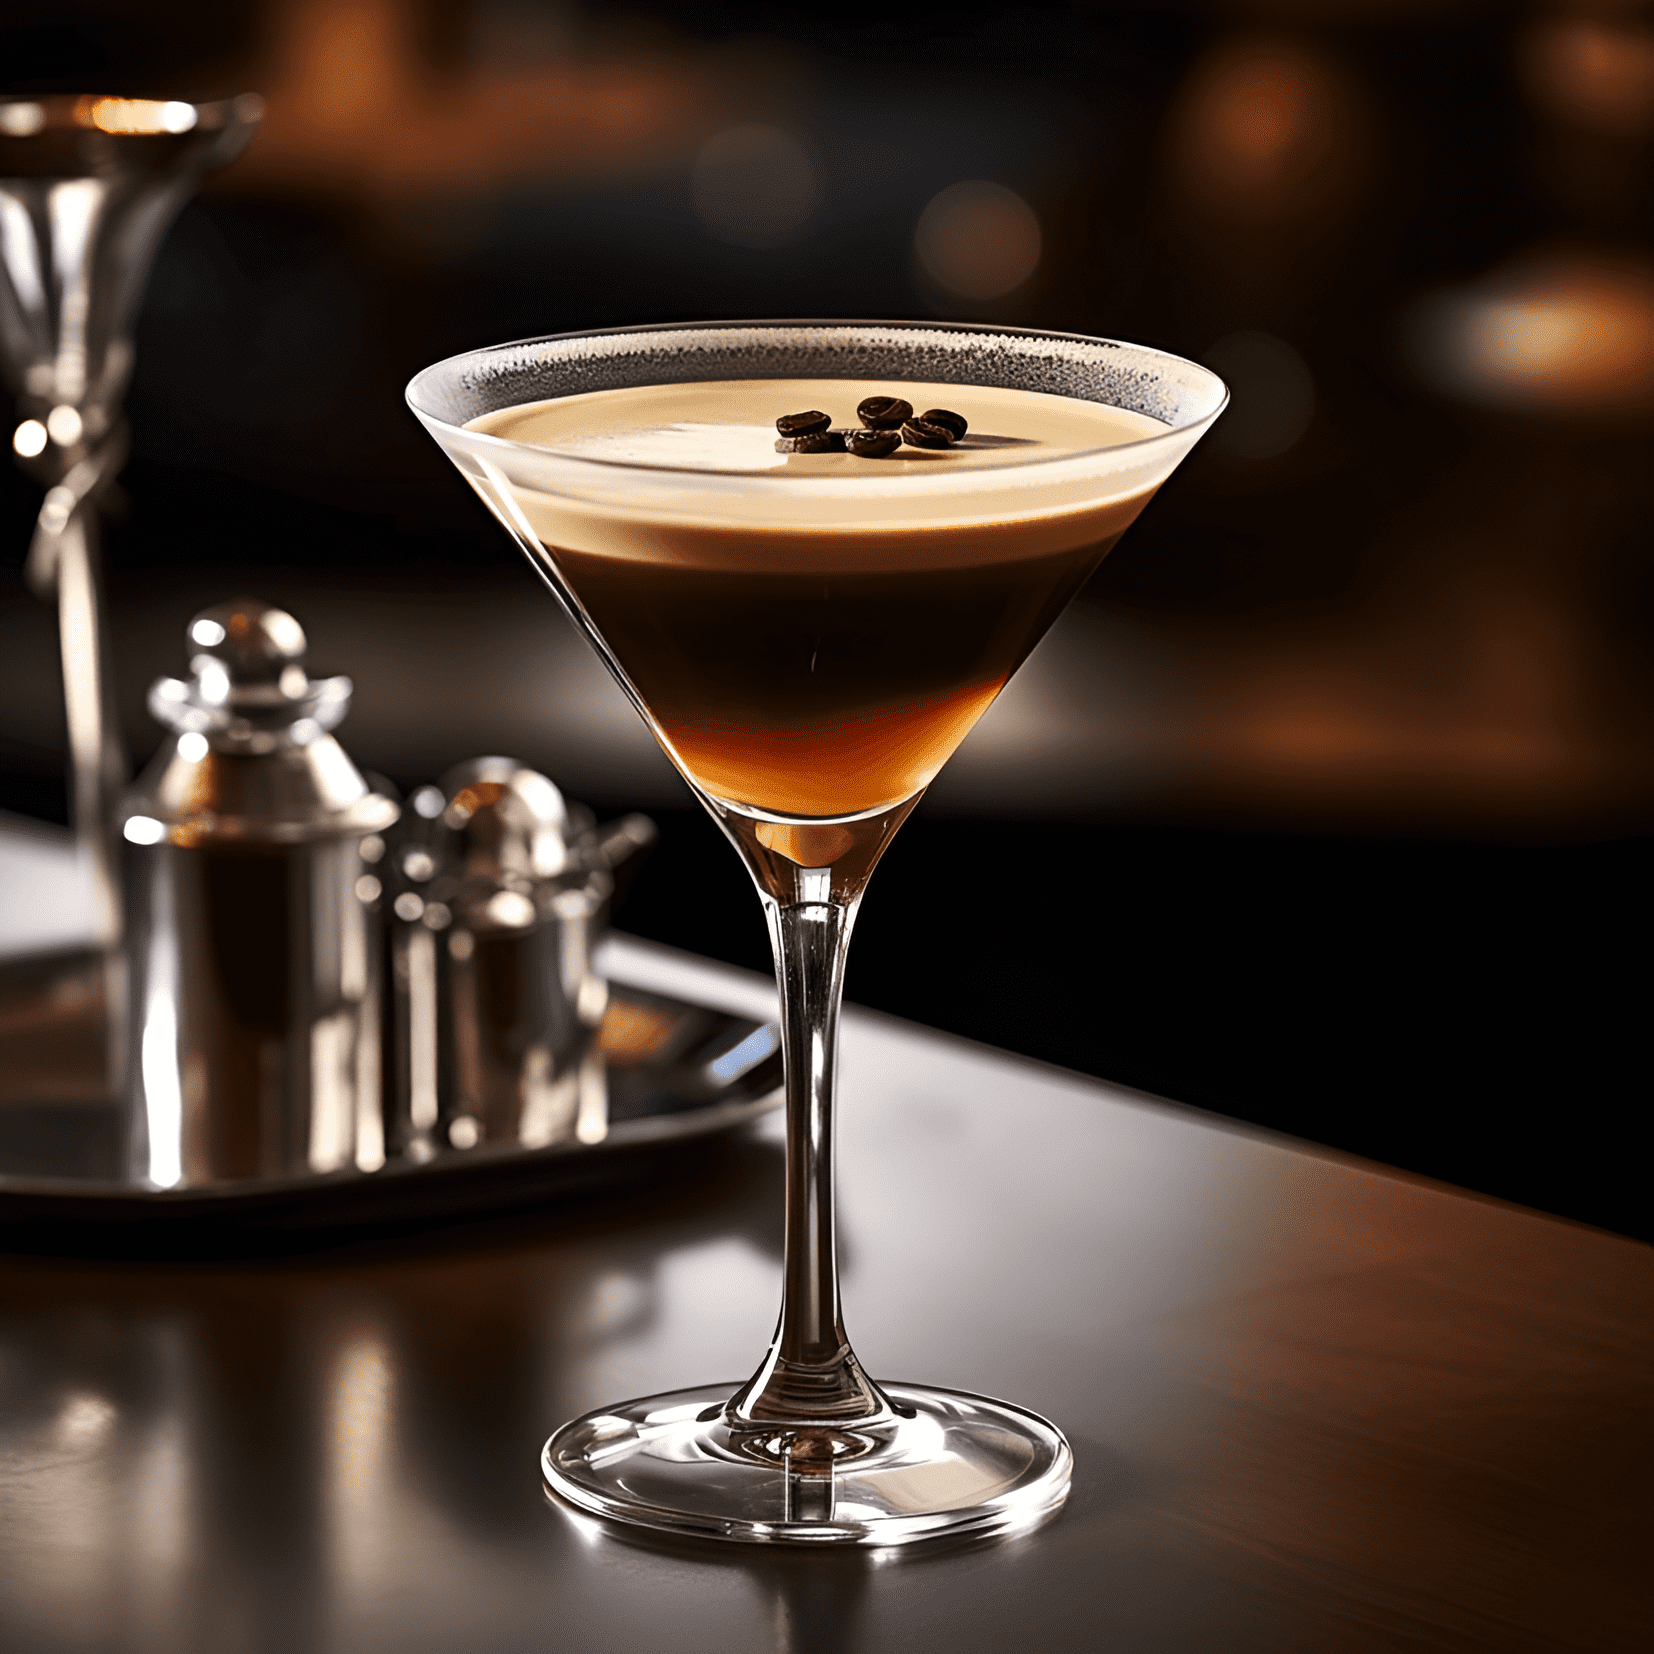 The Coffee Cocktail has a rich, velvety texture with a subtle sweetness and a hint of fruity notes from the port wine. The cognac adds warmth and depth to the flavor, while the egg gives it a creamy, frothy consistency.